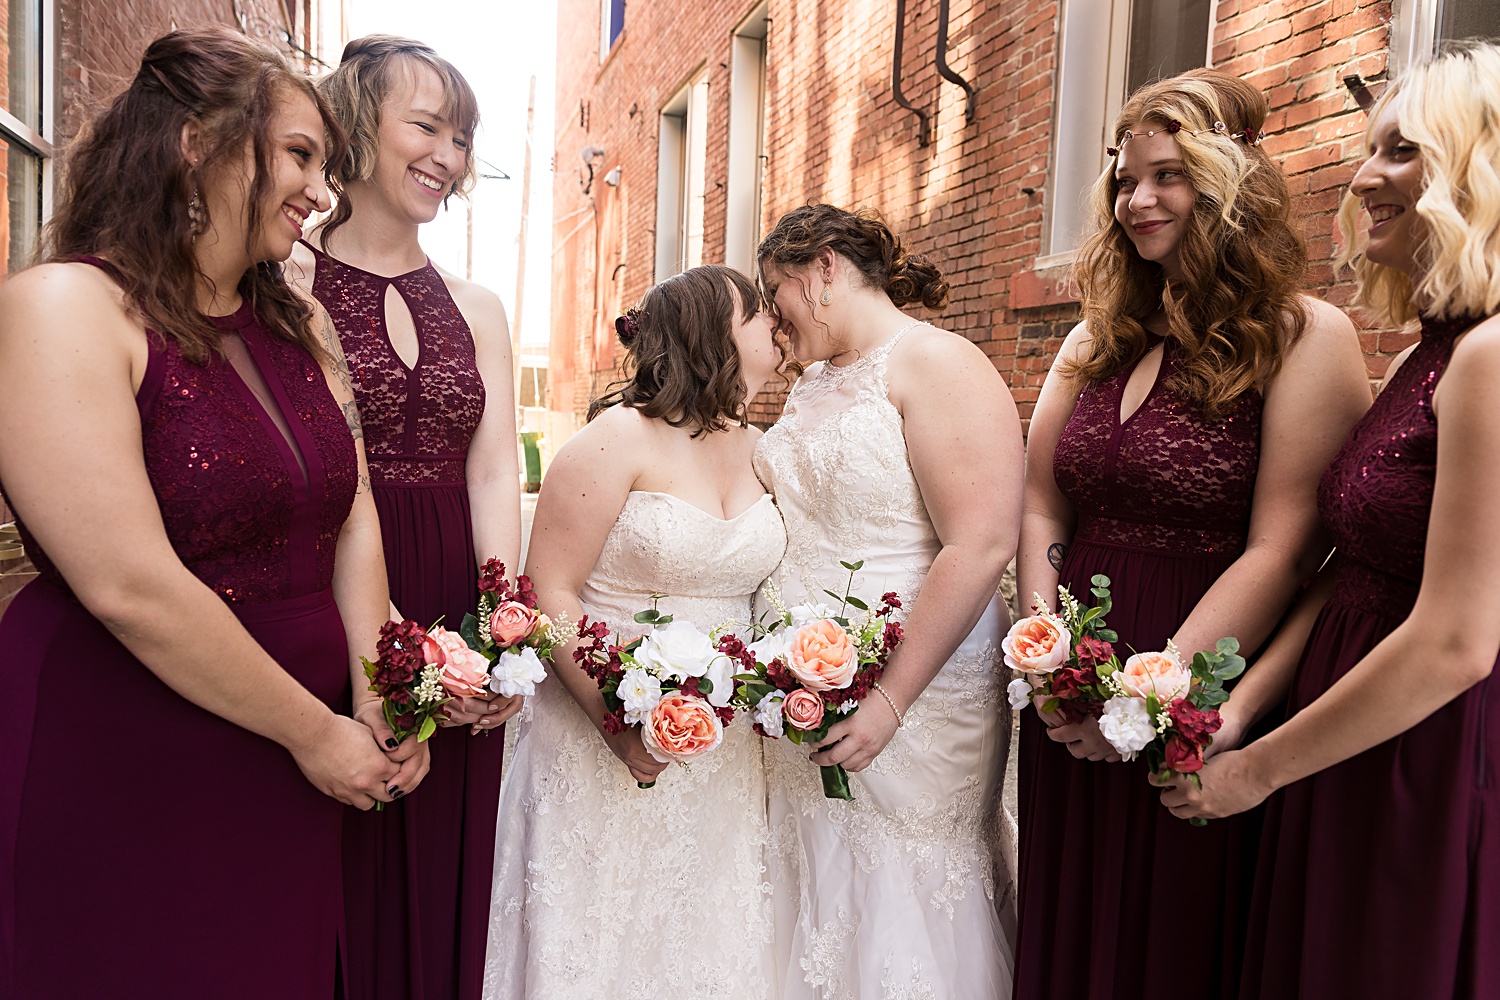 Wedding-Party-Photos-in-the-Crossroads-The-Bride-and-Bauer-KC-Wedding-Photographer-Emily-Lynn-Photography